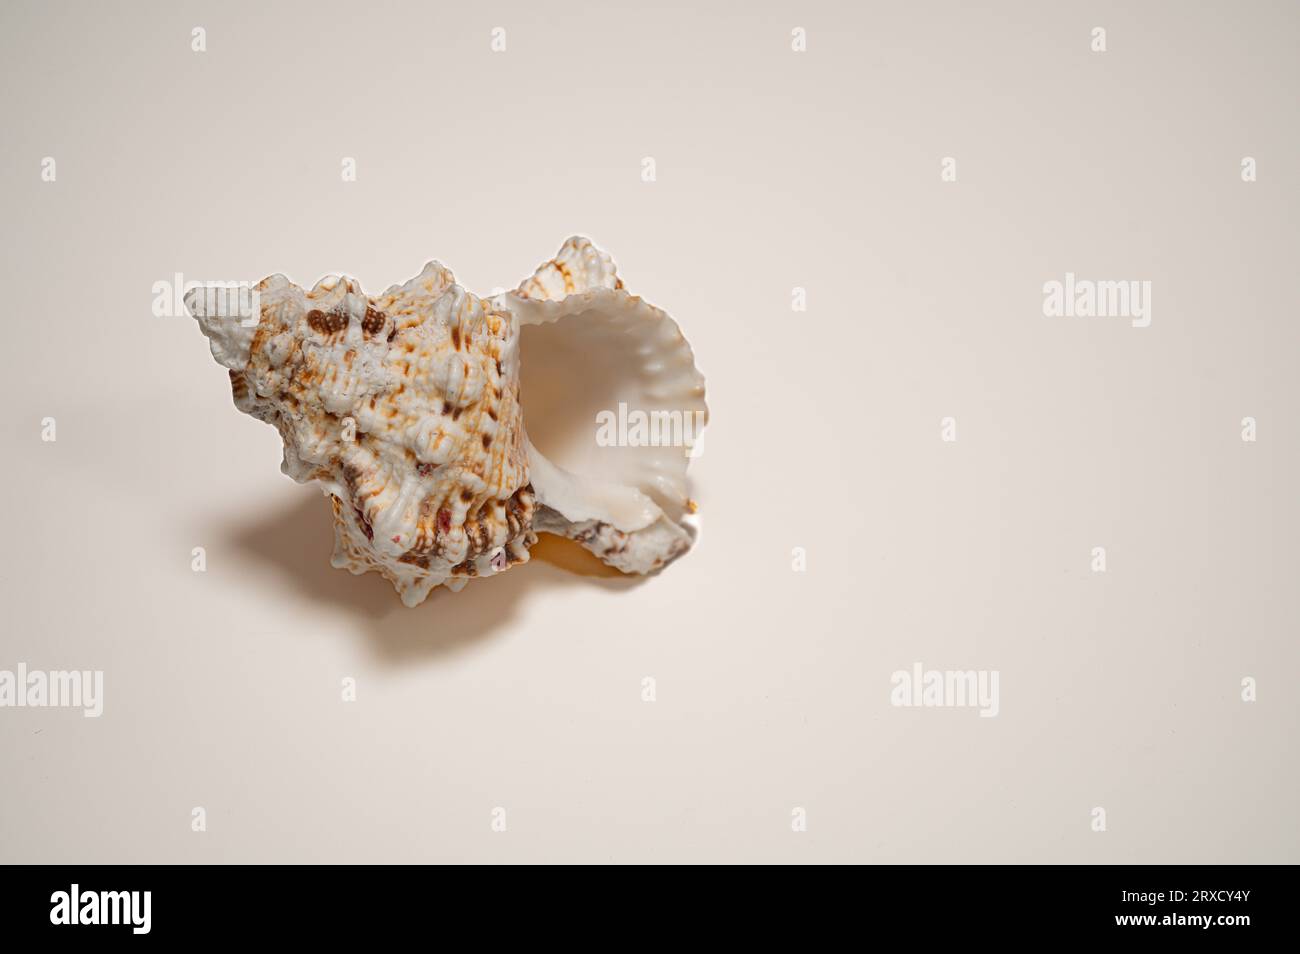 a twisted seashell on a white background Stock Photo